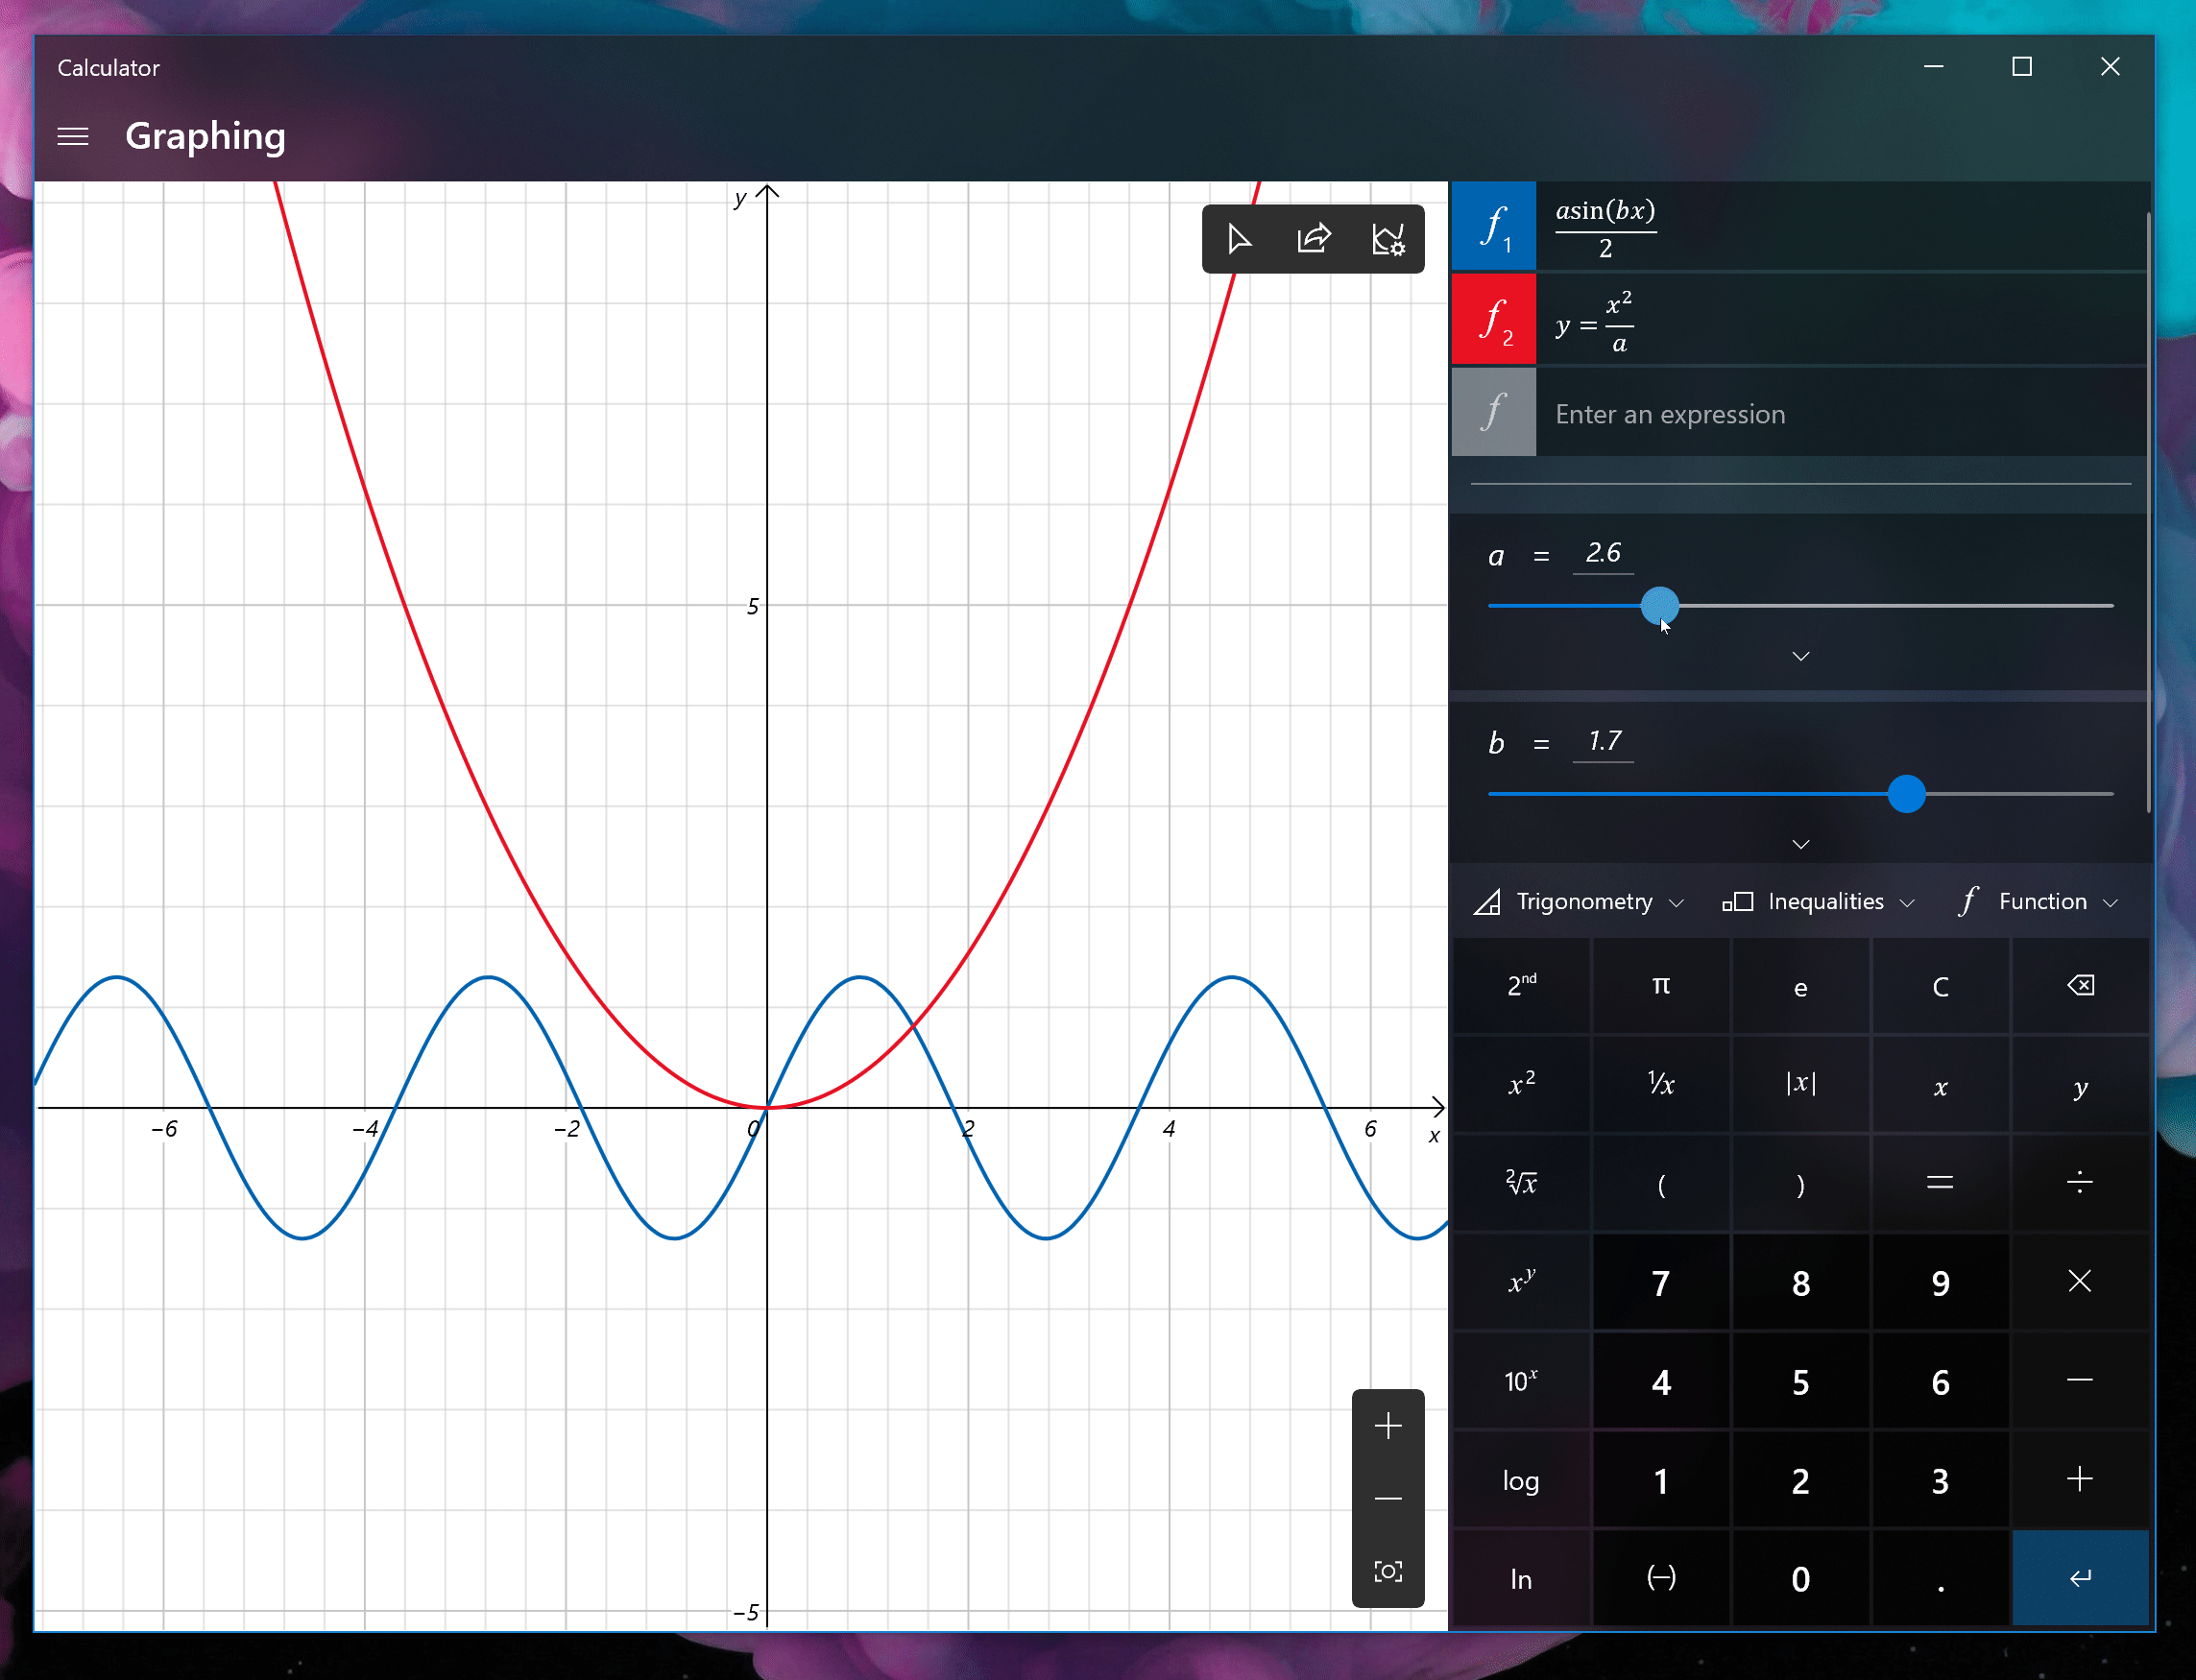 Windows Calculator showing multiple equations with variables plotted on the graph as the variables update live.